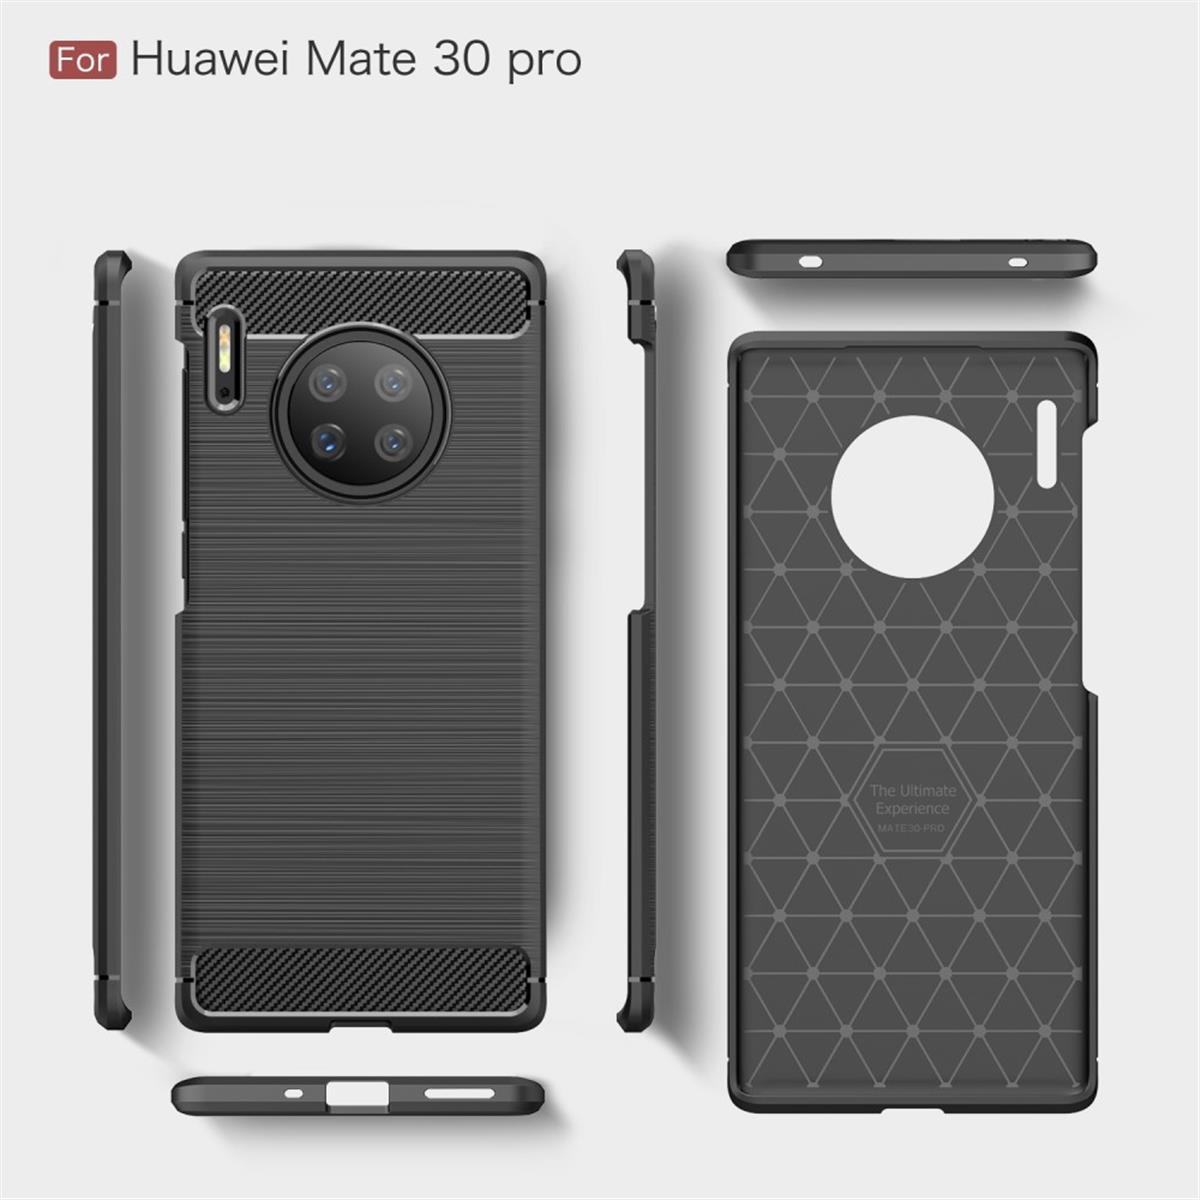 Backcover, Carbon 30 Handycase im Huawei, COVERKINGZ Pro, Mate Look, schwarz